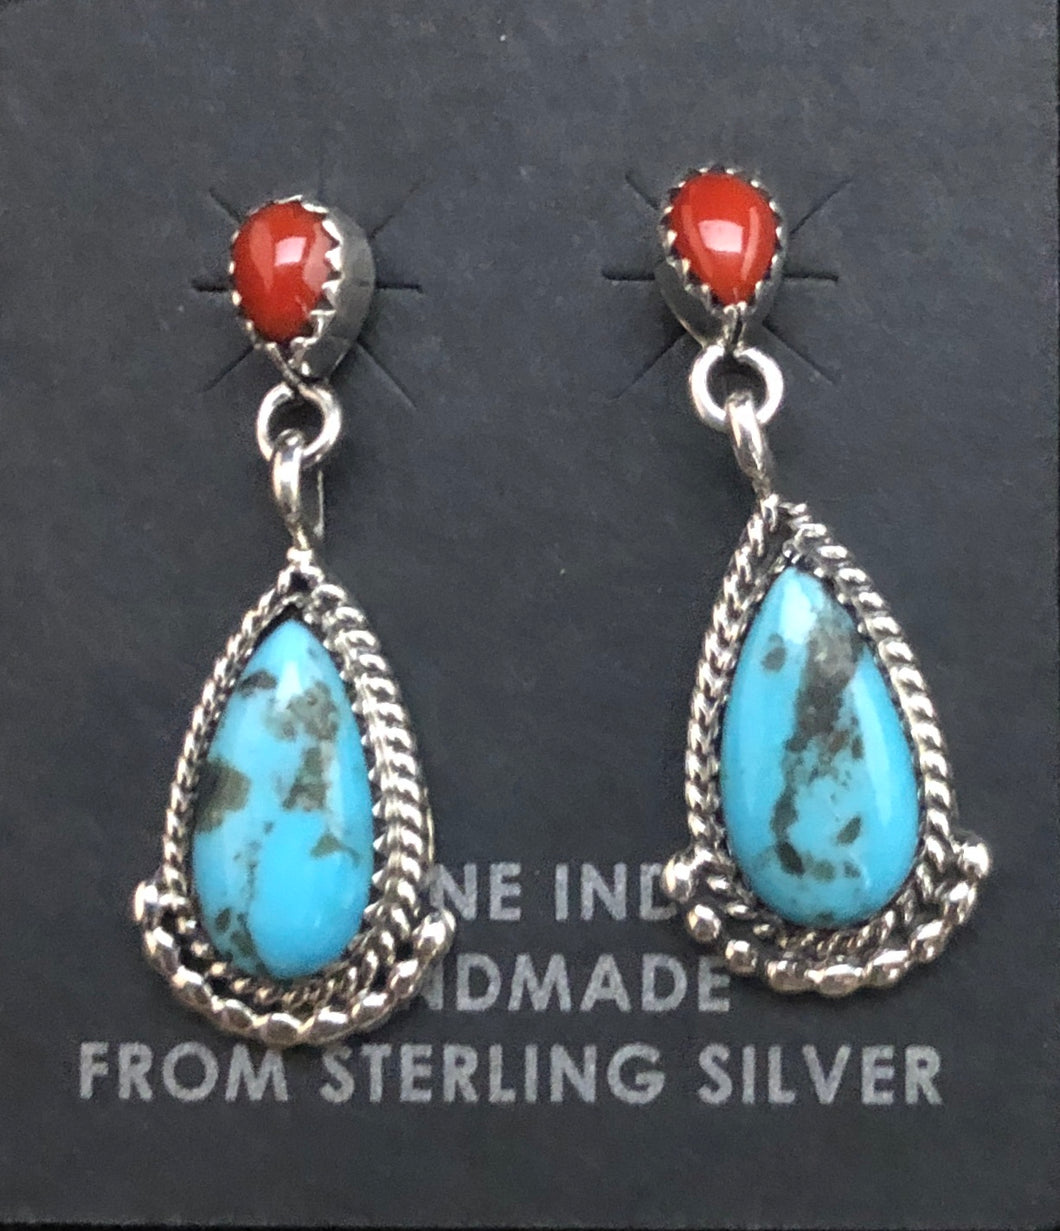 Turquoise and coral sterling silver earrings